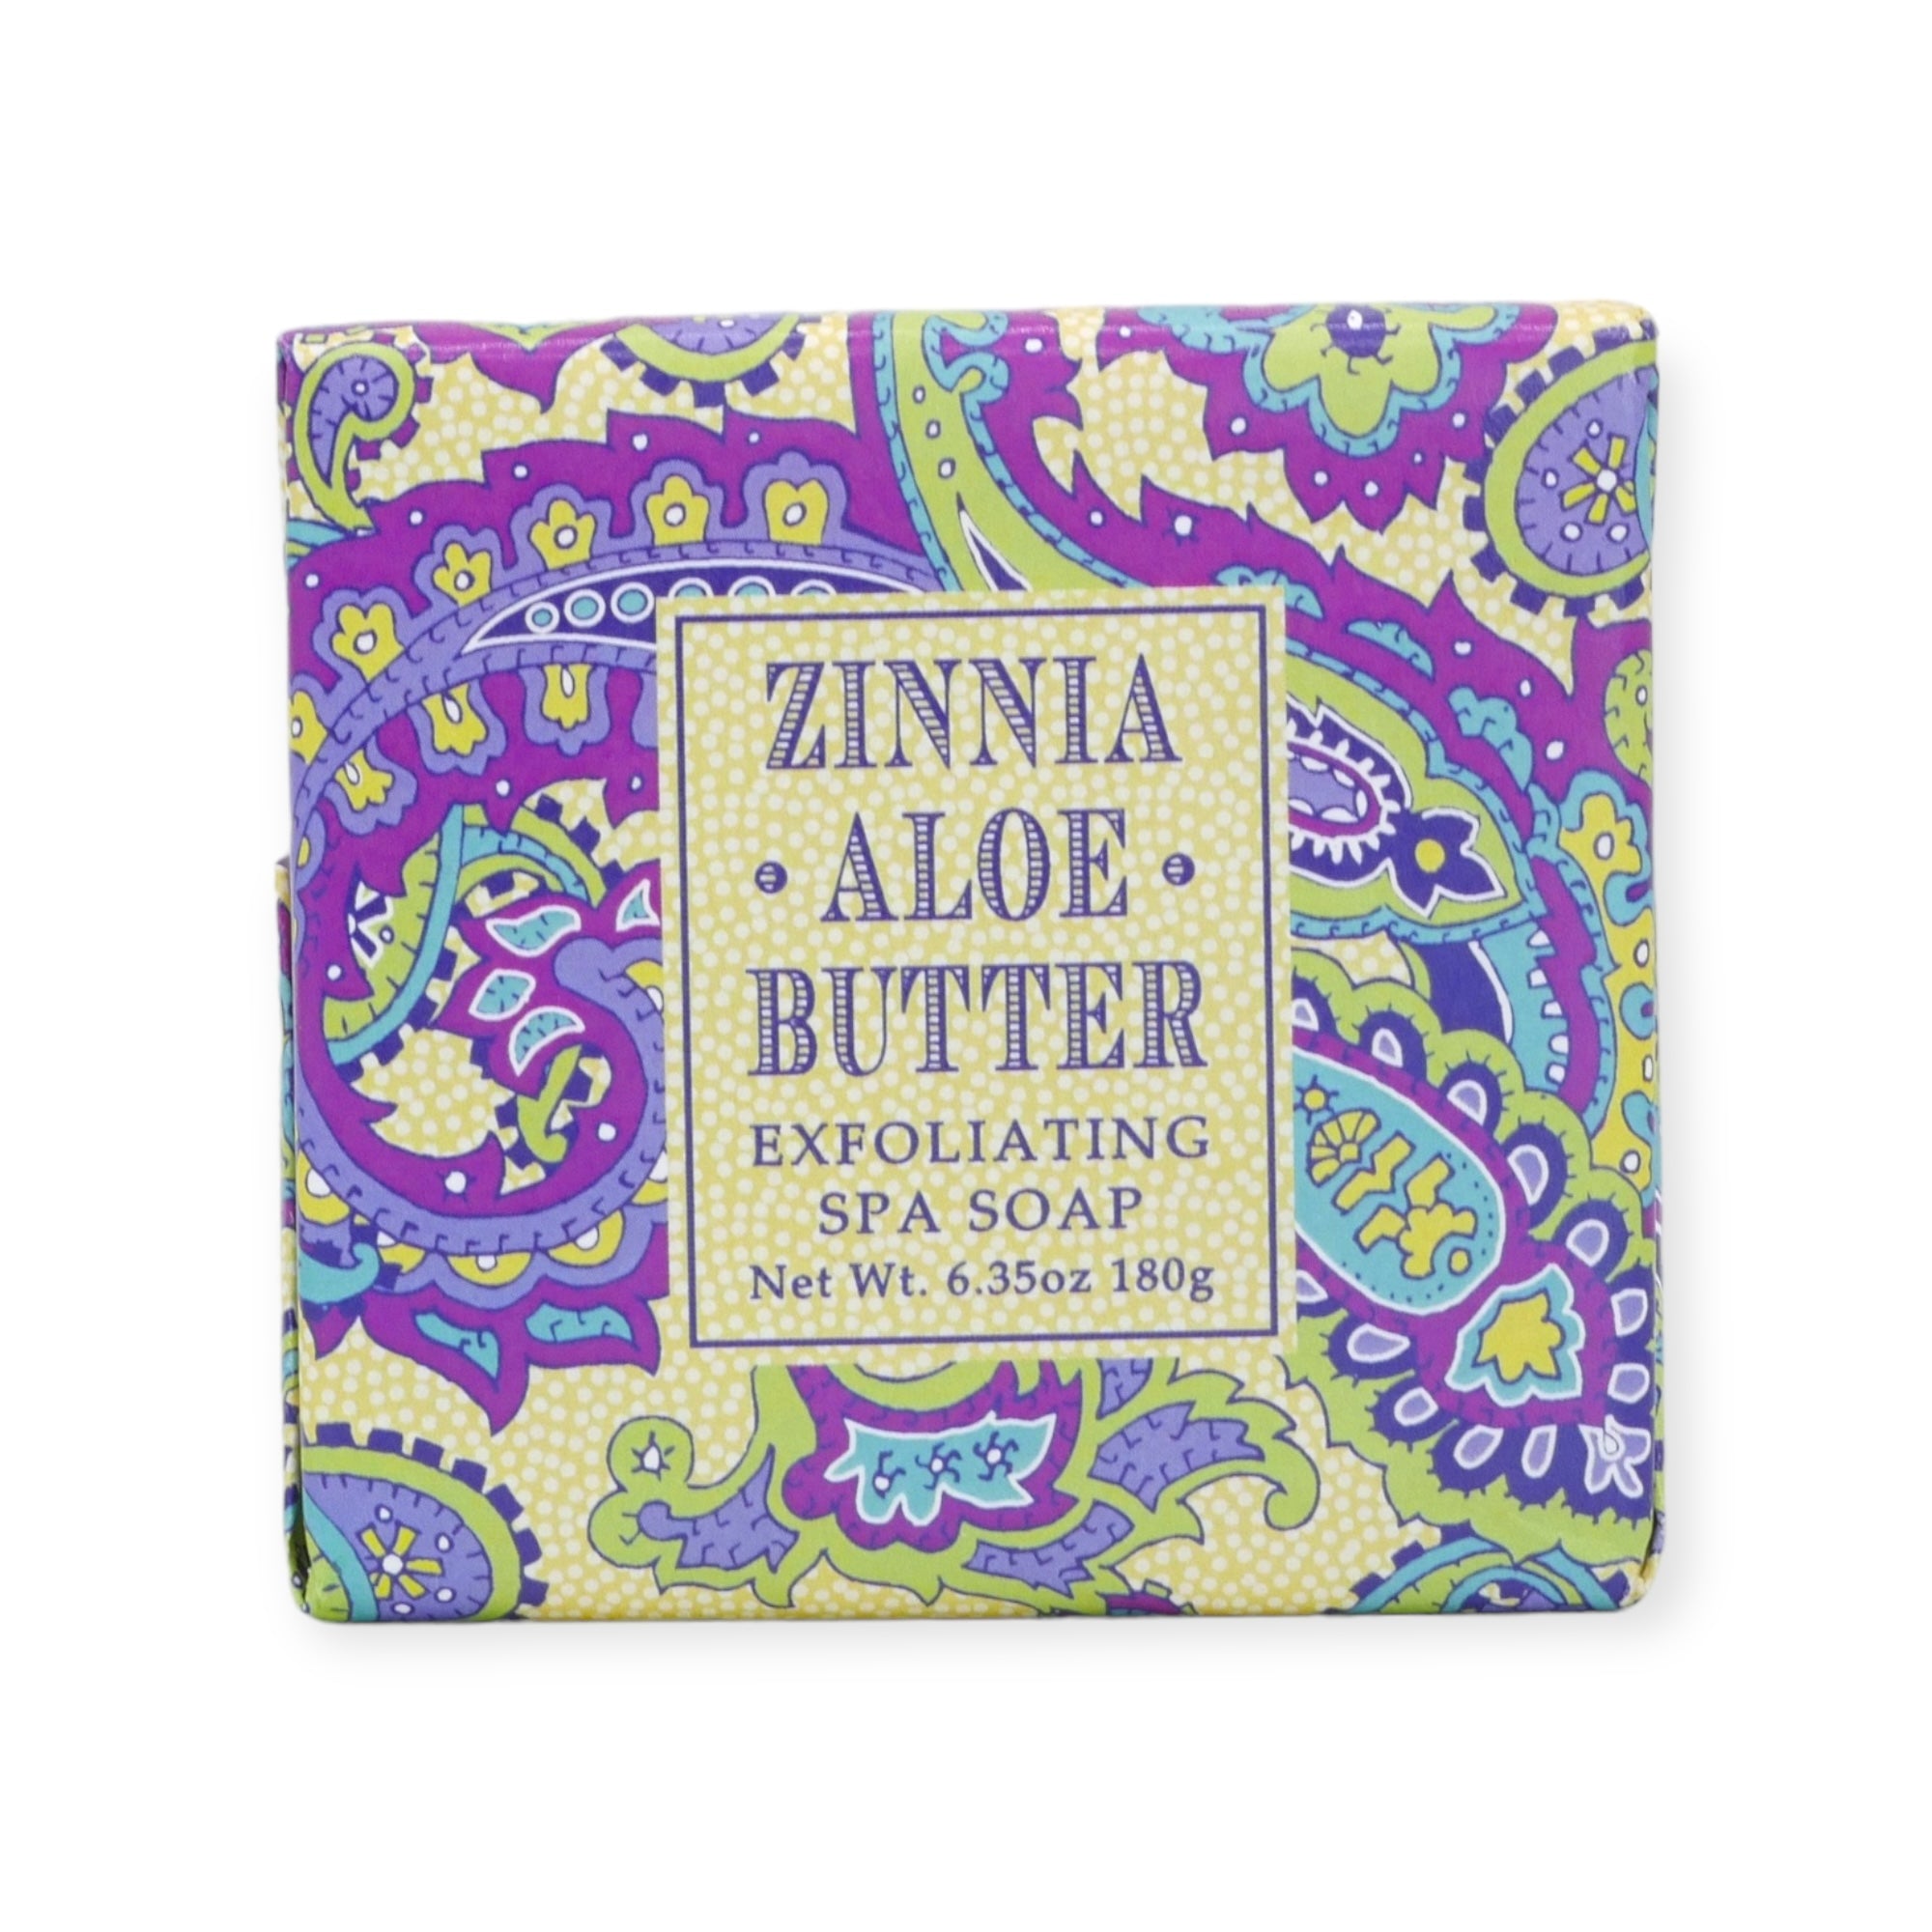 Zinnia Aloe Butter Exfoliating Spa Soap by Greenwich Bay Trading Co.